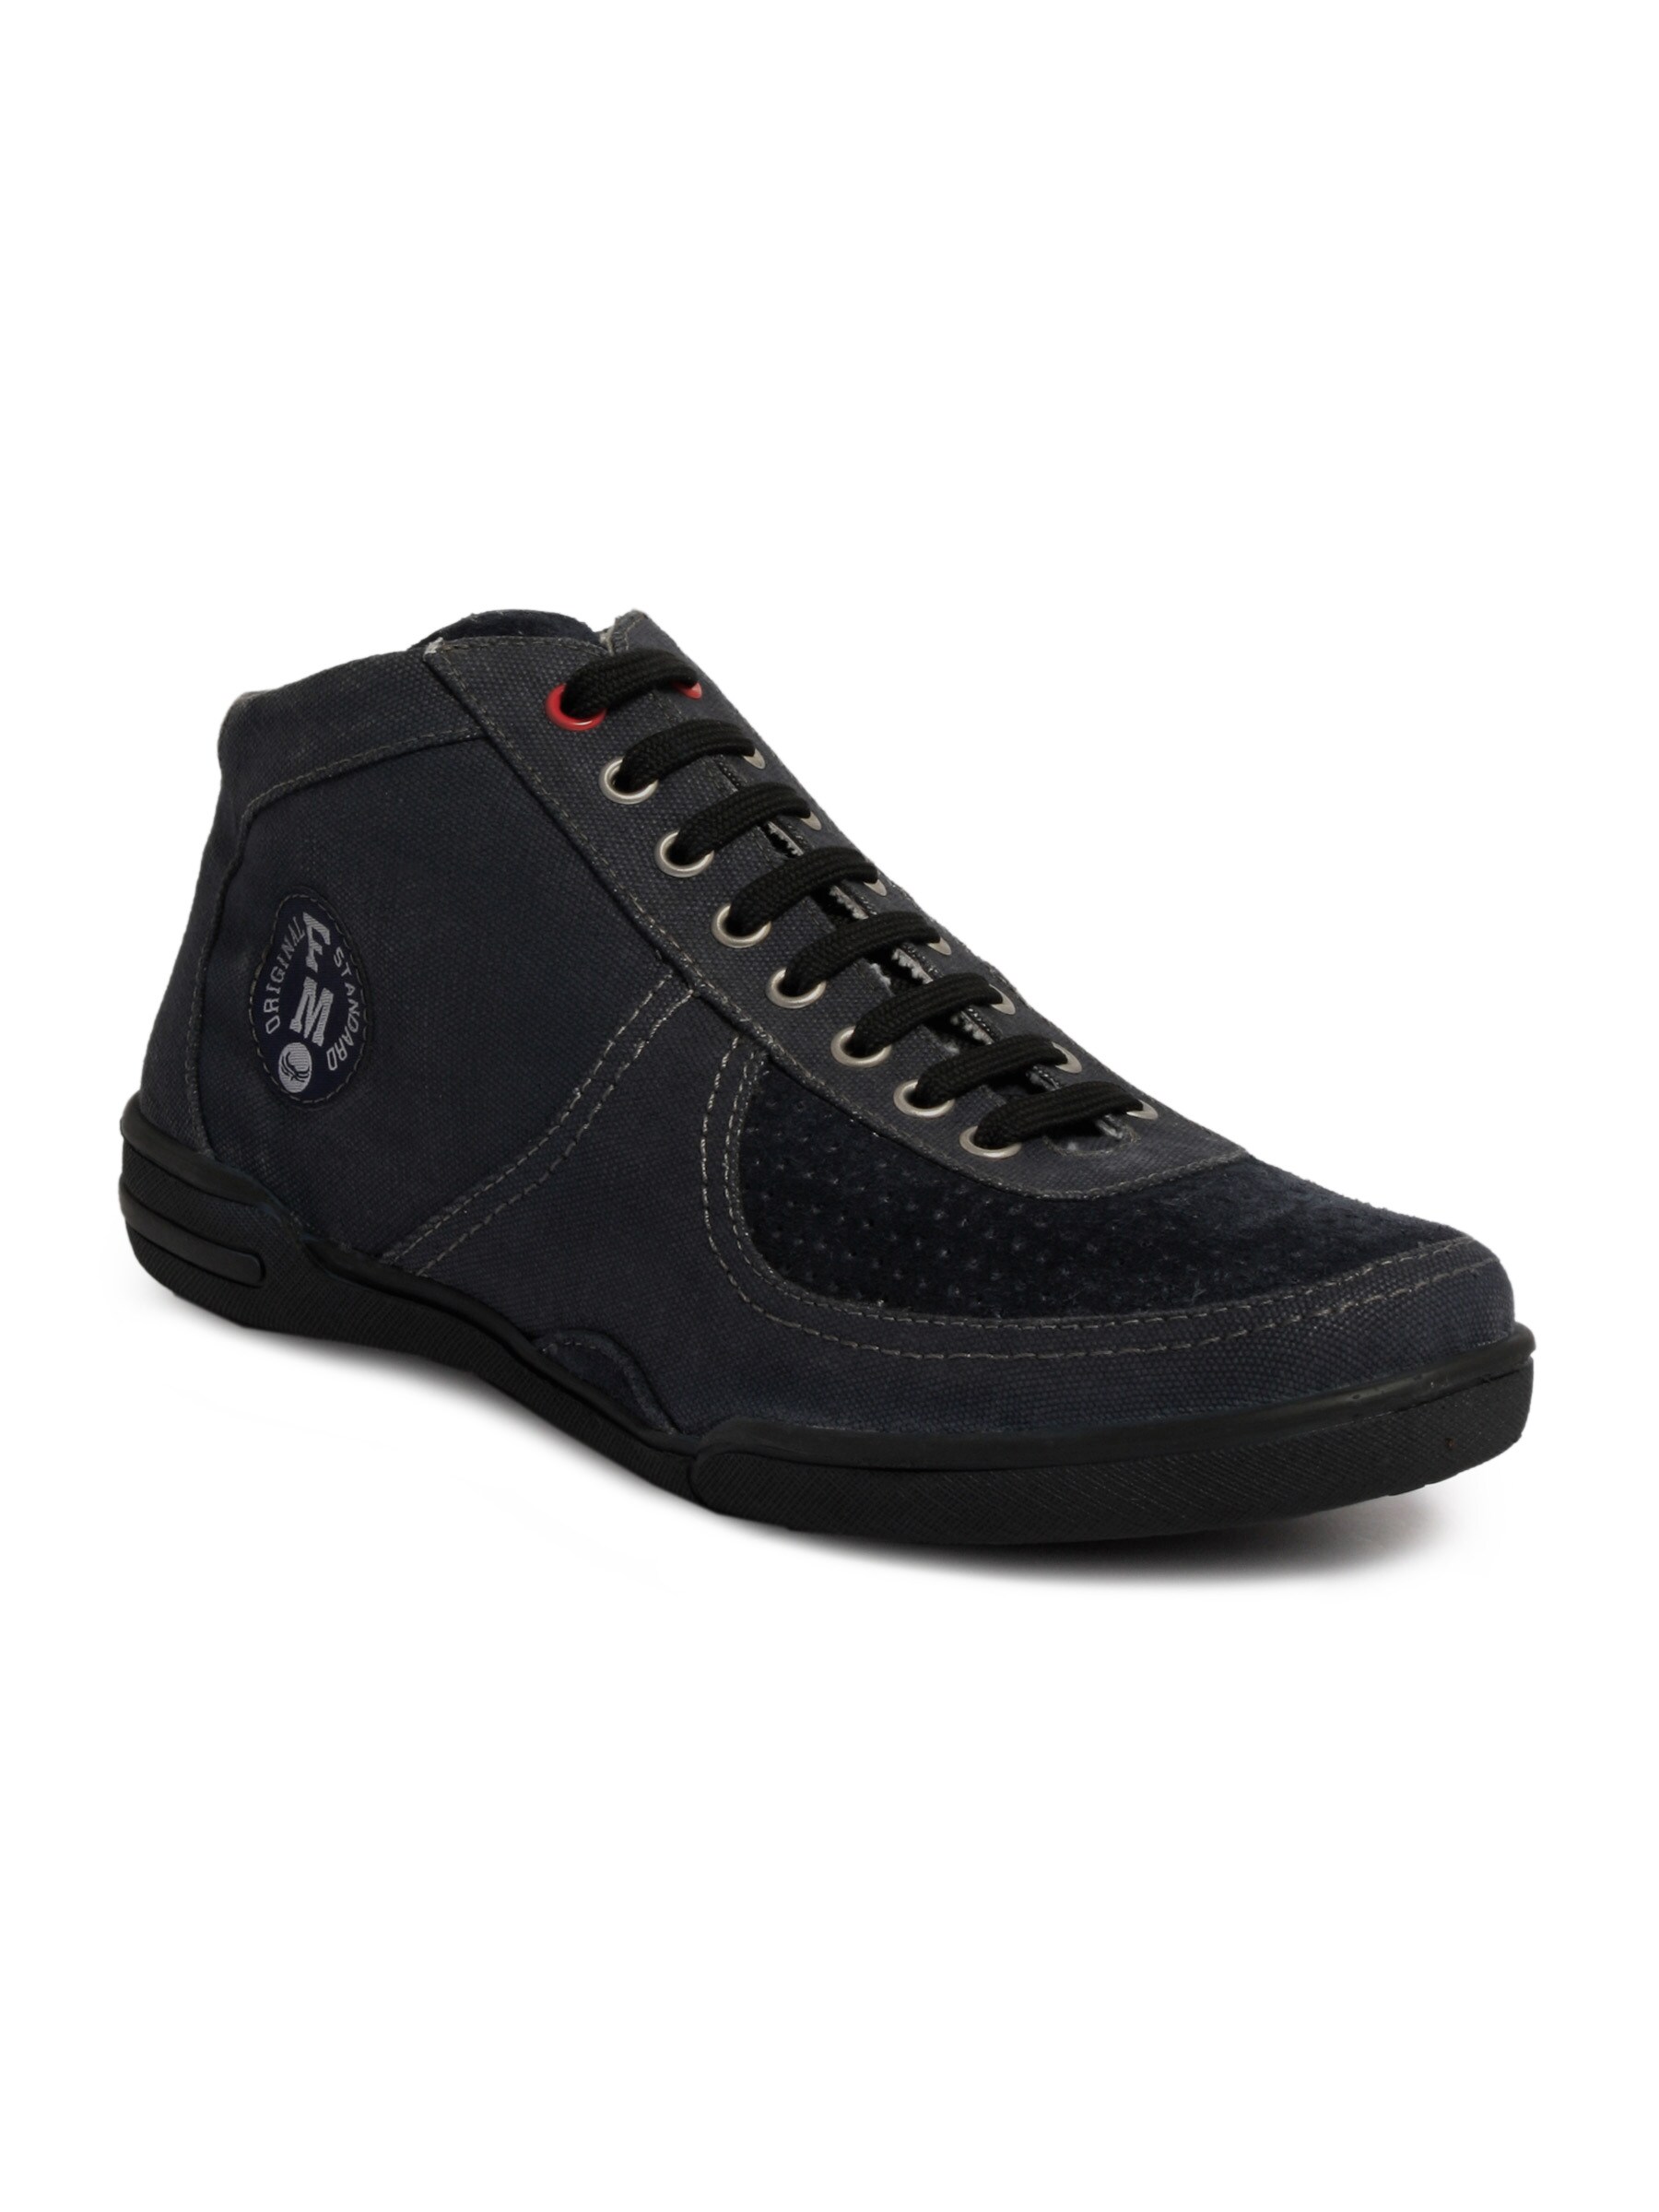 Flying Machine Men Casual Navy Blue Casual Shoes